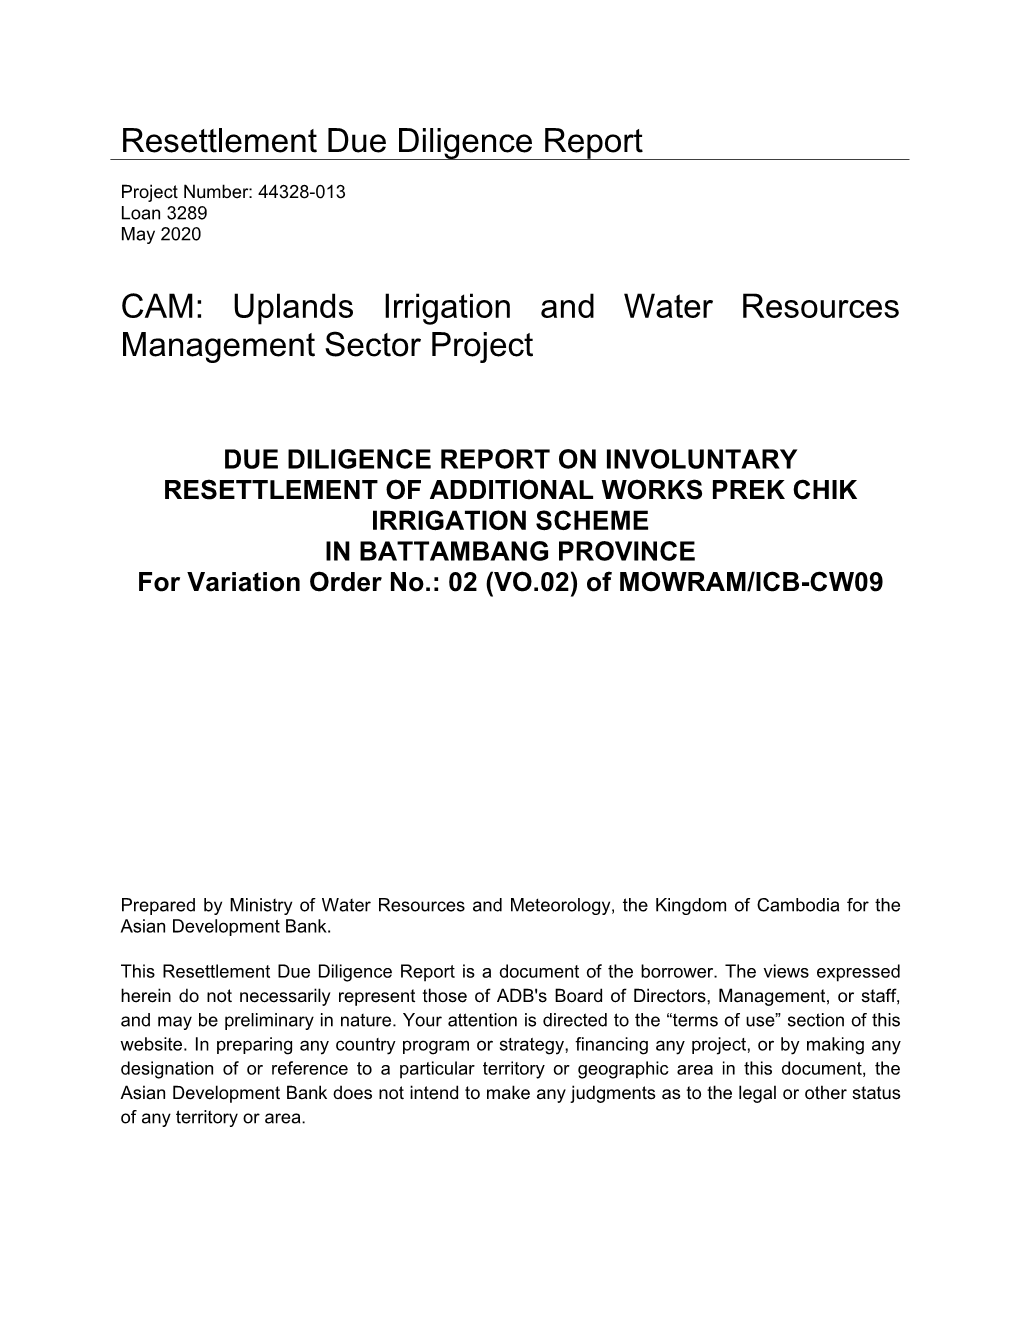 Uplands Irrigation and Water Resources Management Sector Project